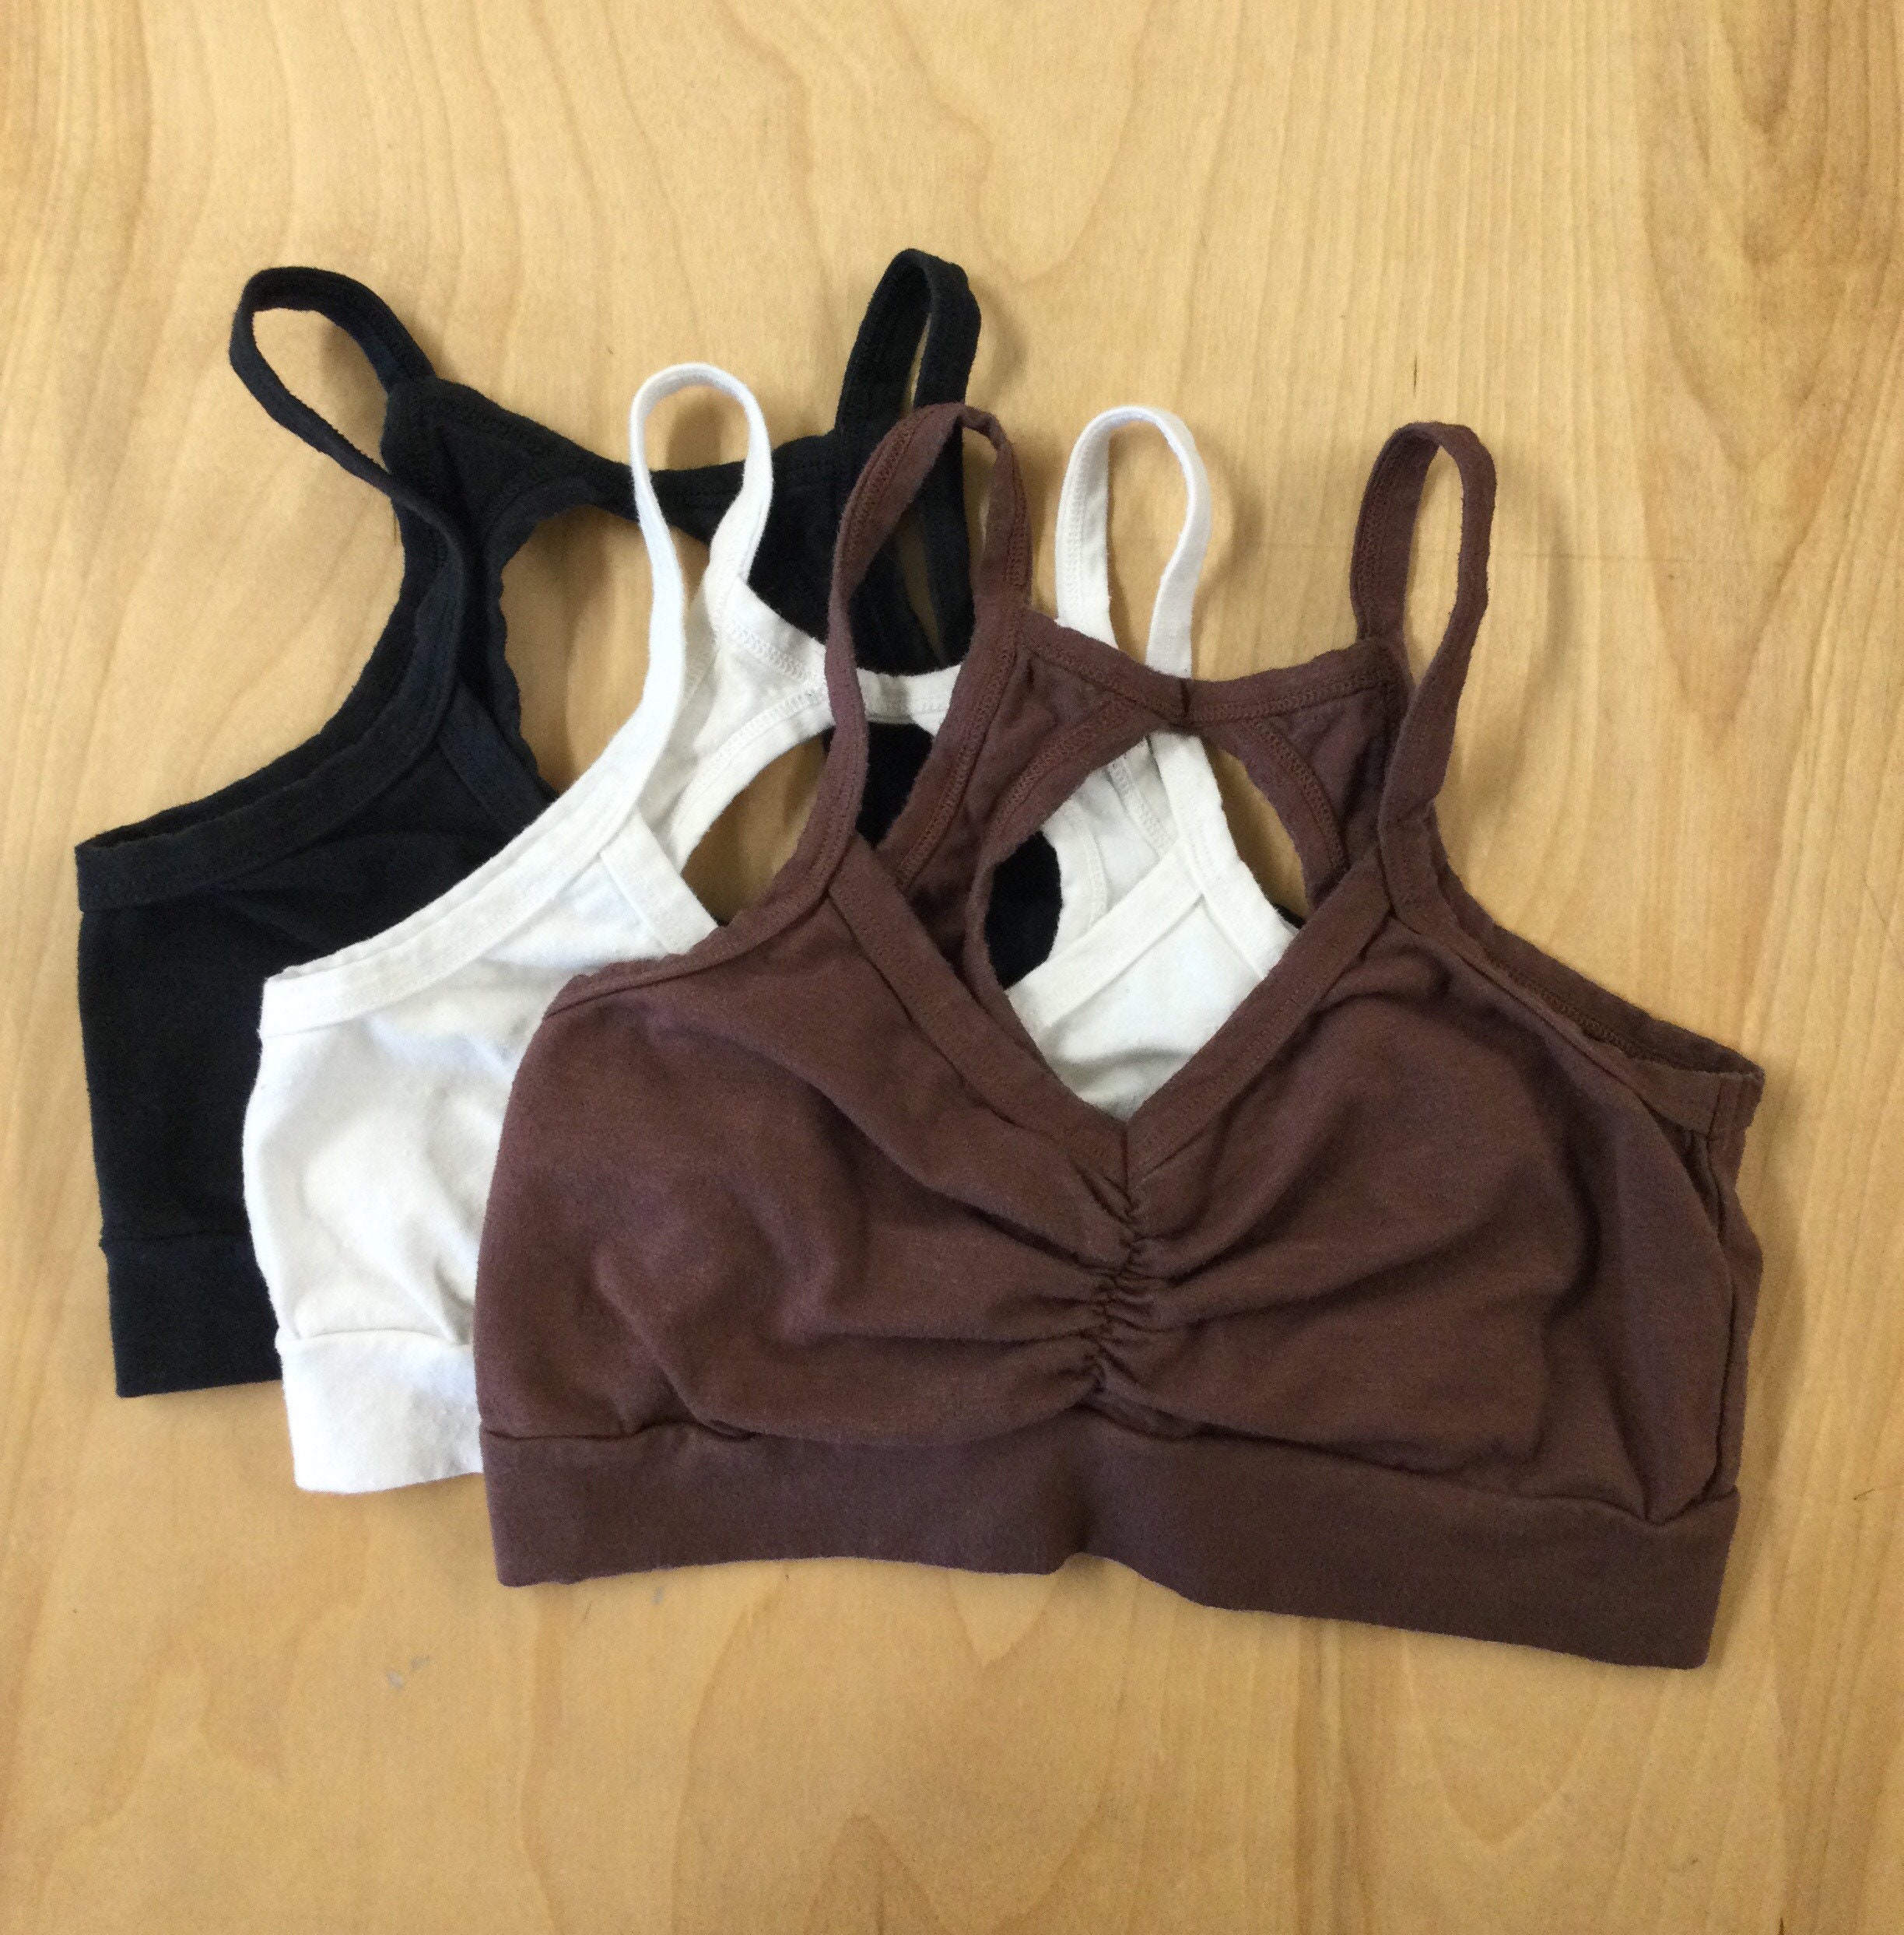 Buy 2 Get 1 Free Item, Faux Leather Bralette Bra for Women Plus Size XL XXL  Available 